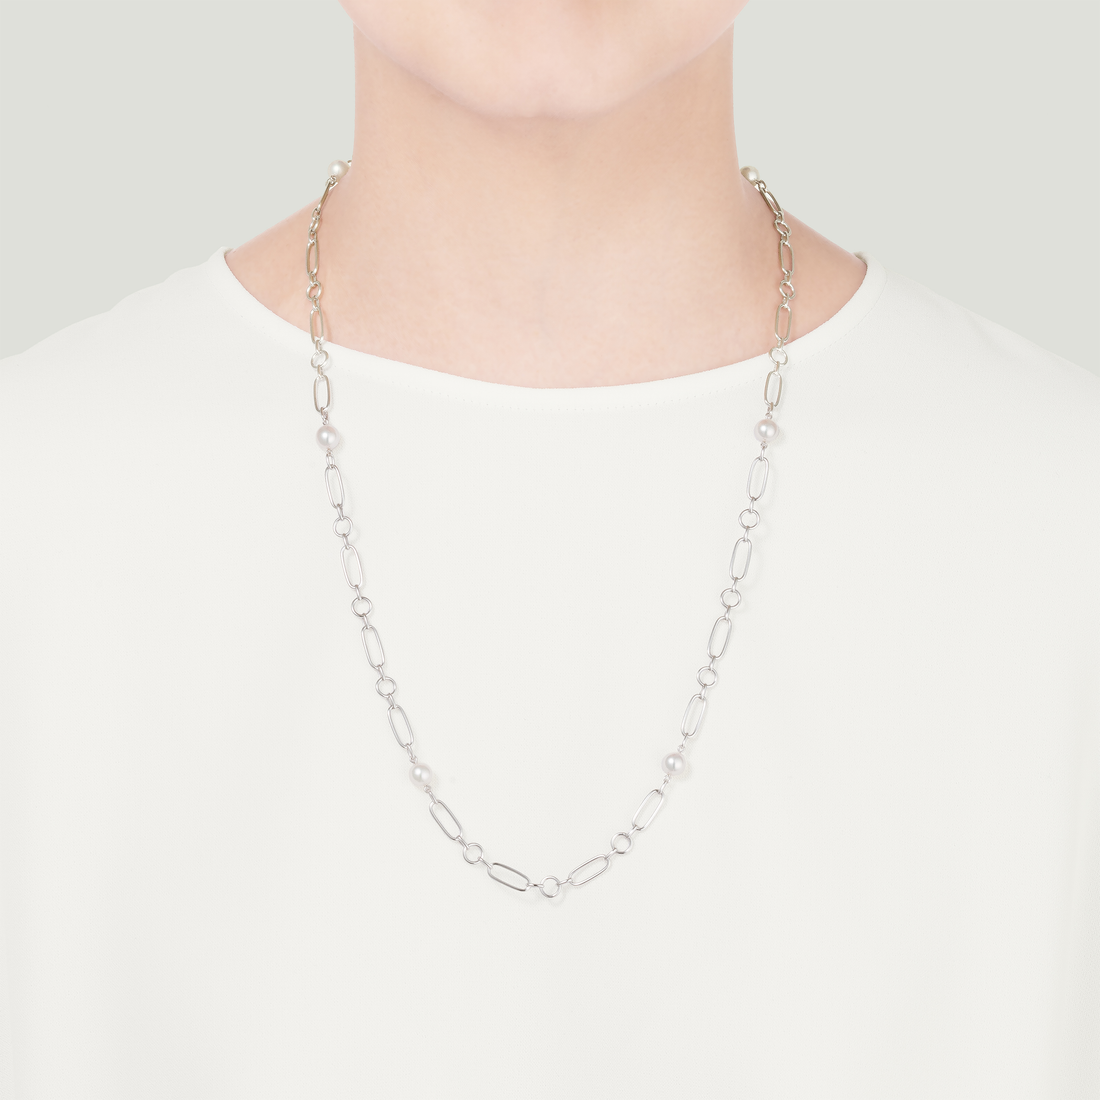 Mikimoto Pearl Station Necklace Chain in 18k Gold - Skeie's Jewelers